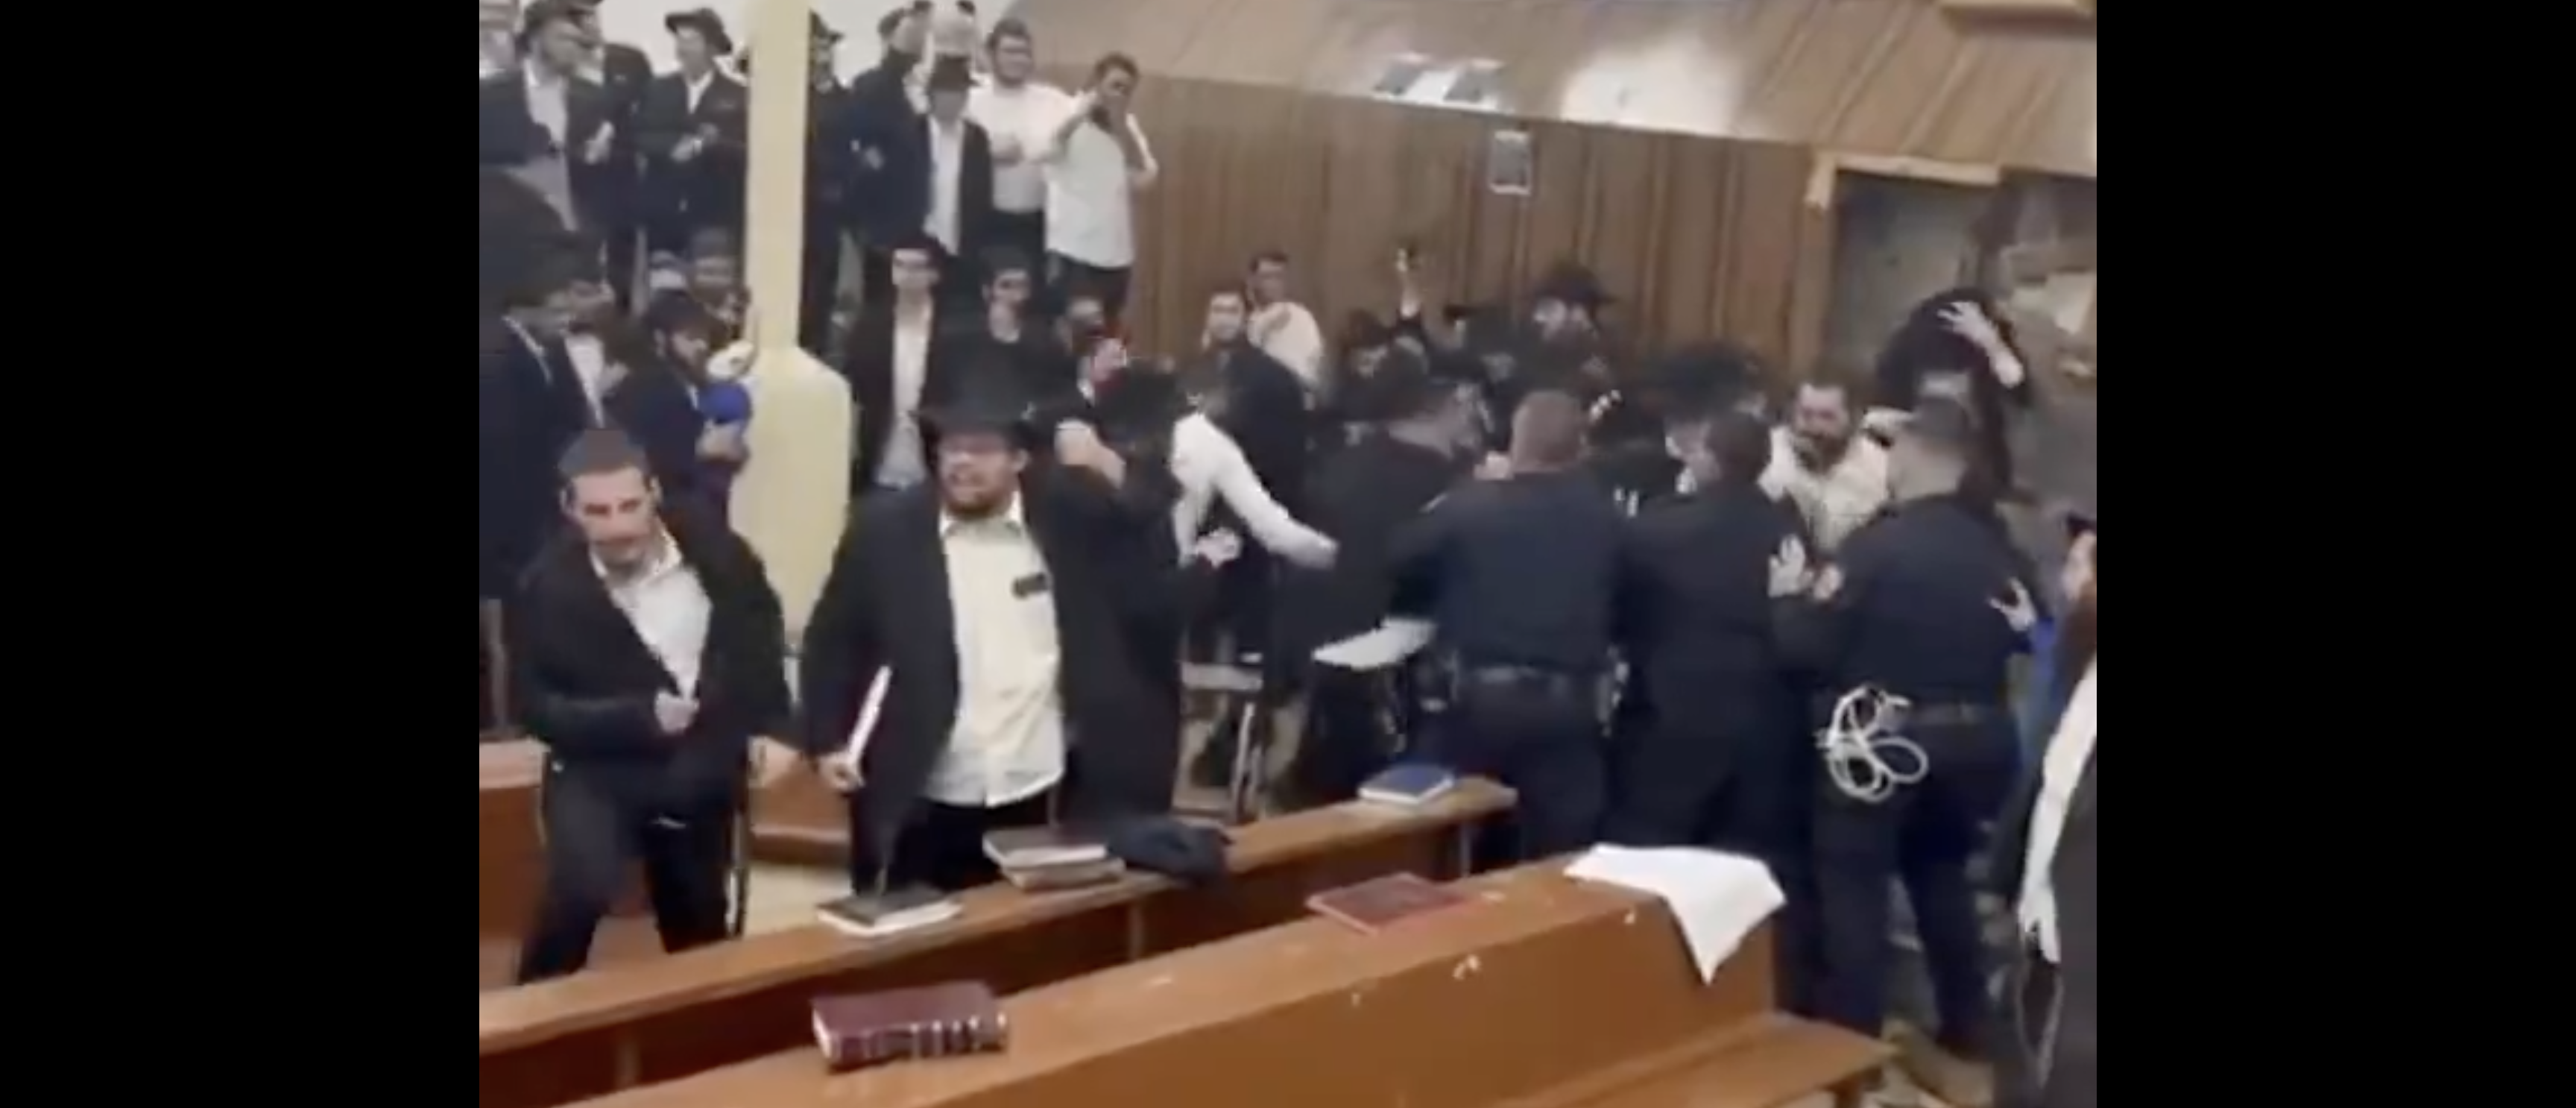 Chabad Lubavitch Synagogue Erupts Into Chaos After Members Refuse To Allow Secret Tunnel To Be Sealed: REPORT